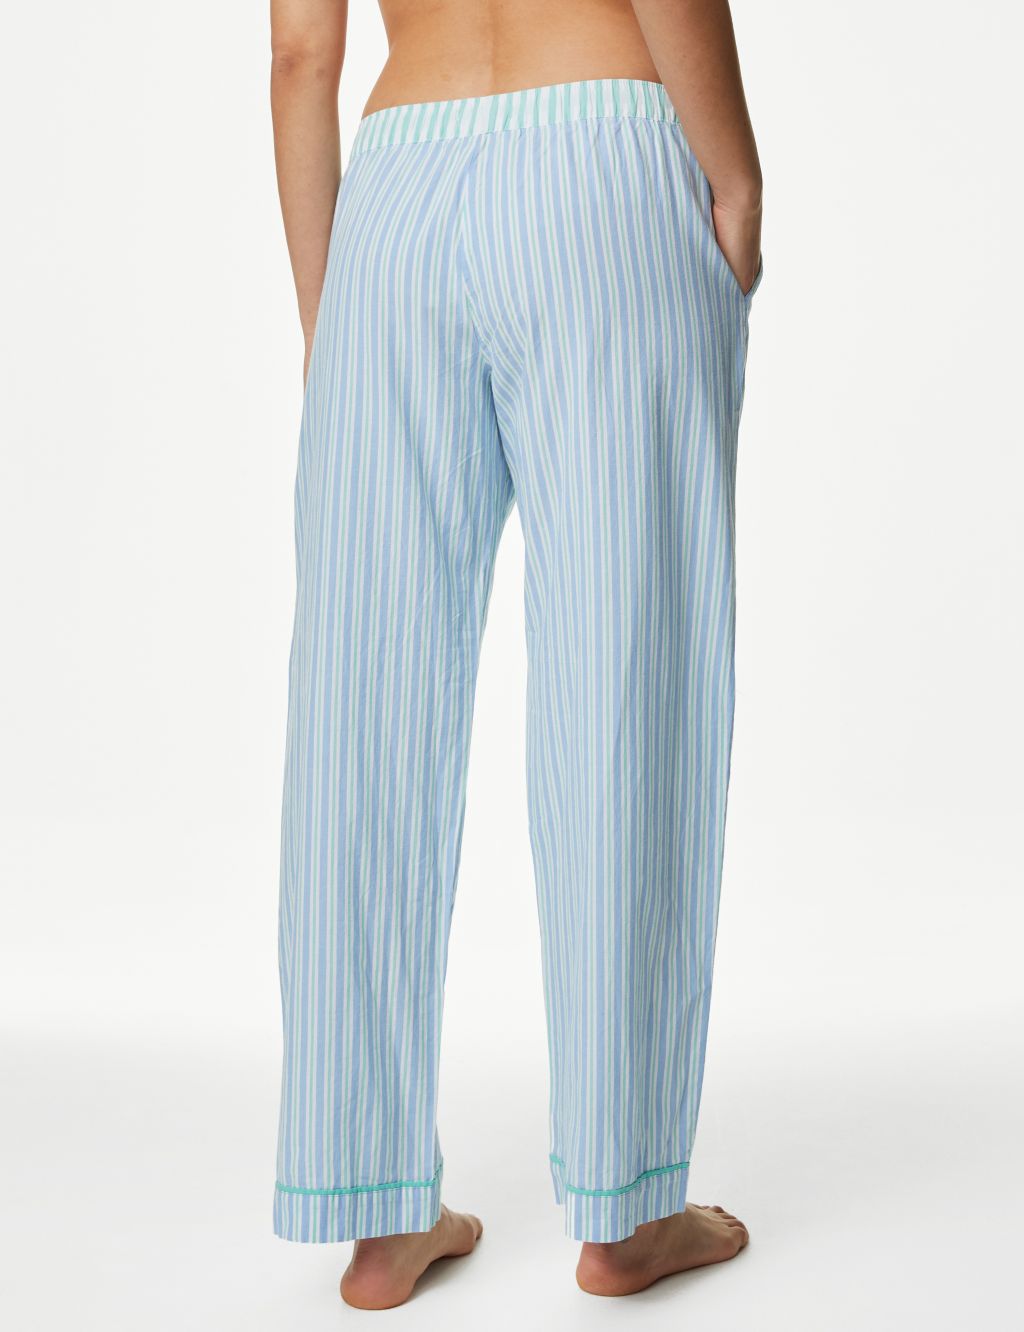 PJ Bottoms in Fine Cotton Pale Blue and Pink Stripe